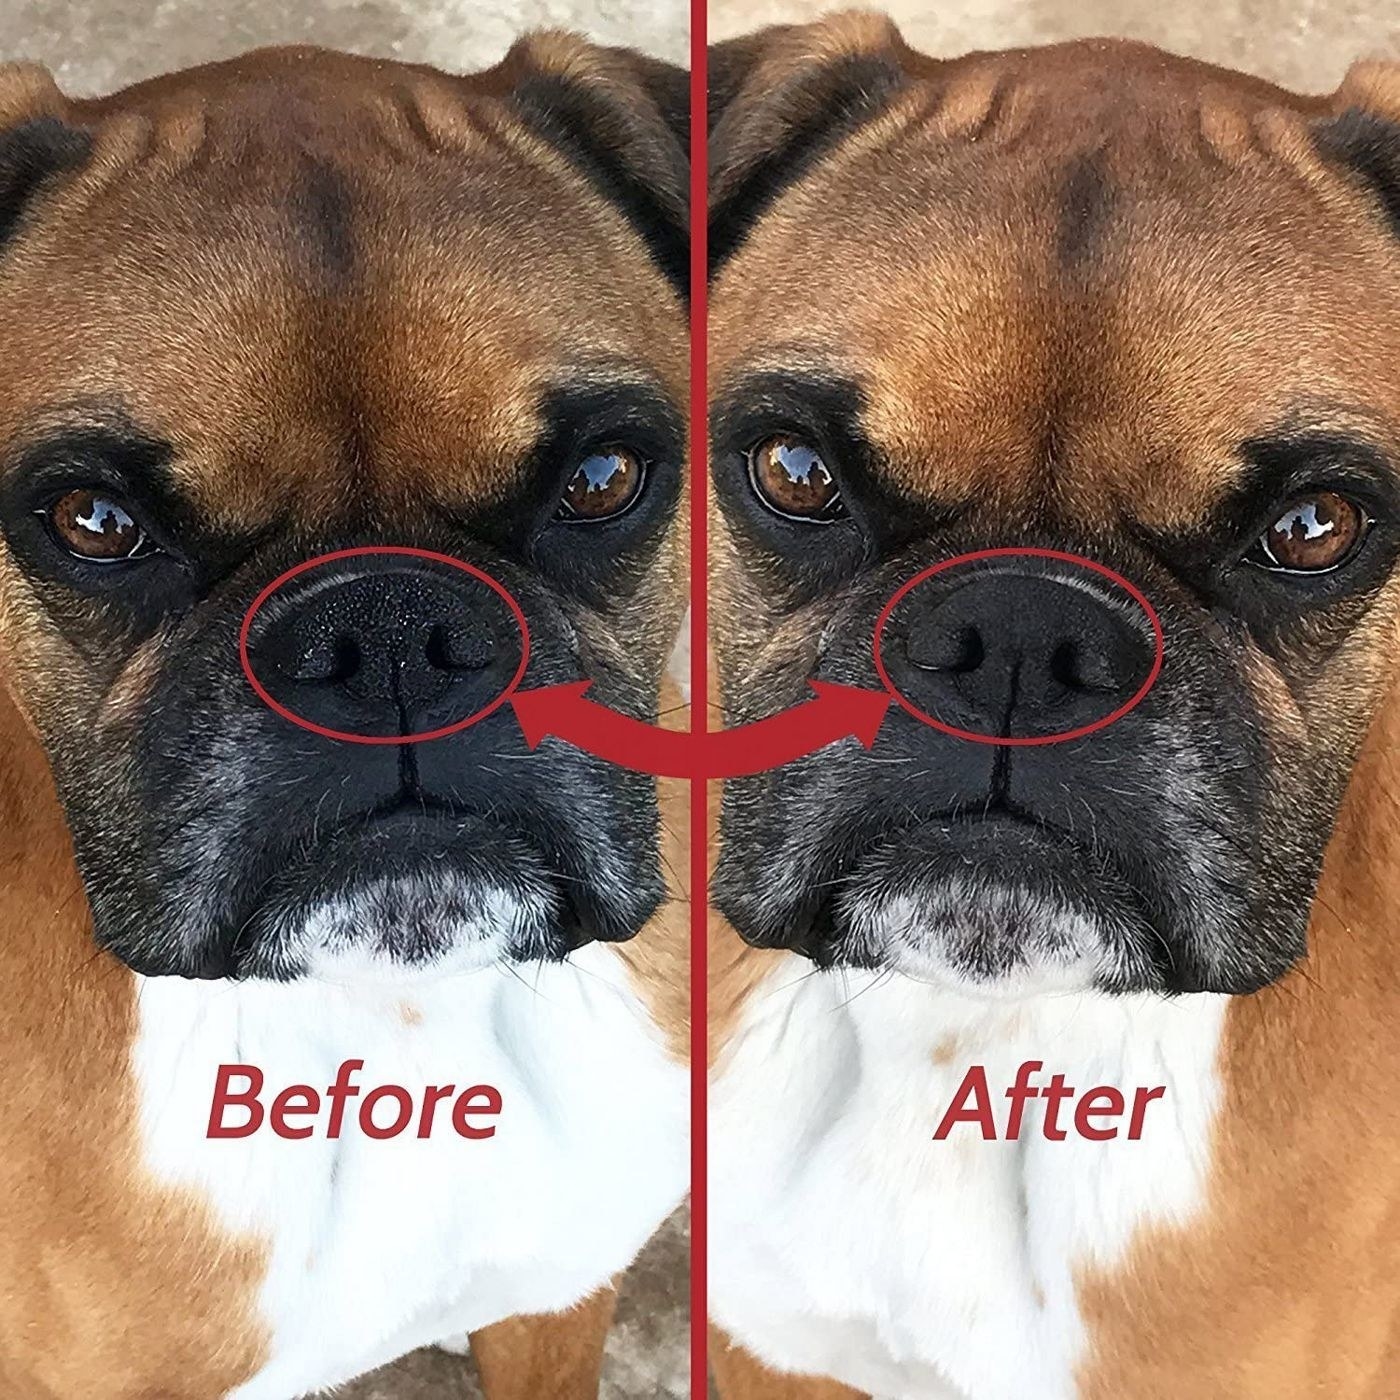 Before of a boxer with a dried nose and the same dog after the balm has been applied and their nose looks moisturized